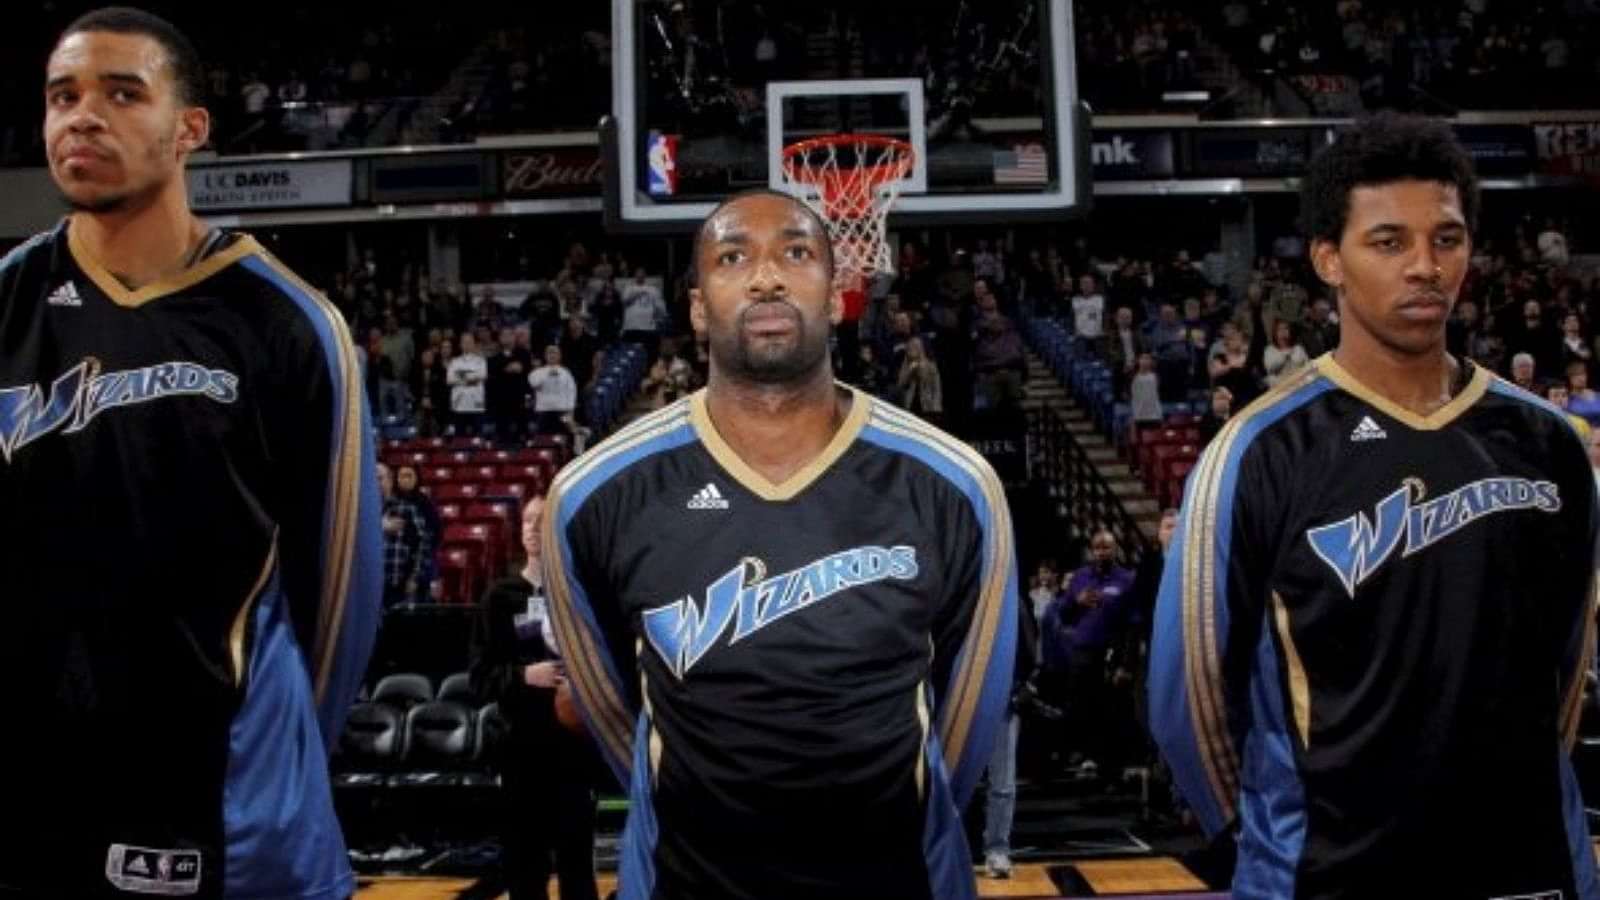 Losing $1000 For Missing Practice Decades Ago, Allen Iverson Gets Support  From 'Bewildered' Gilbert Arenas Who Calls Out Players For Missing Games Now  - The SportsRush